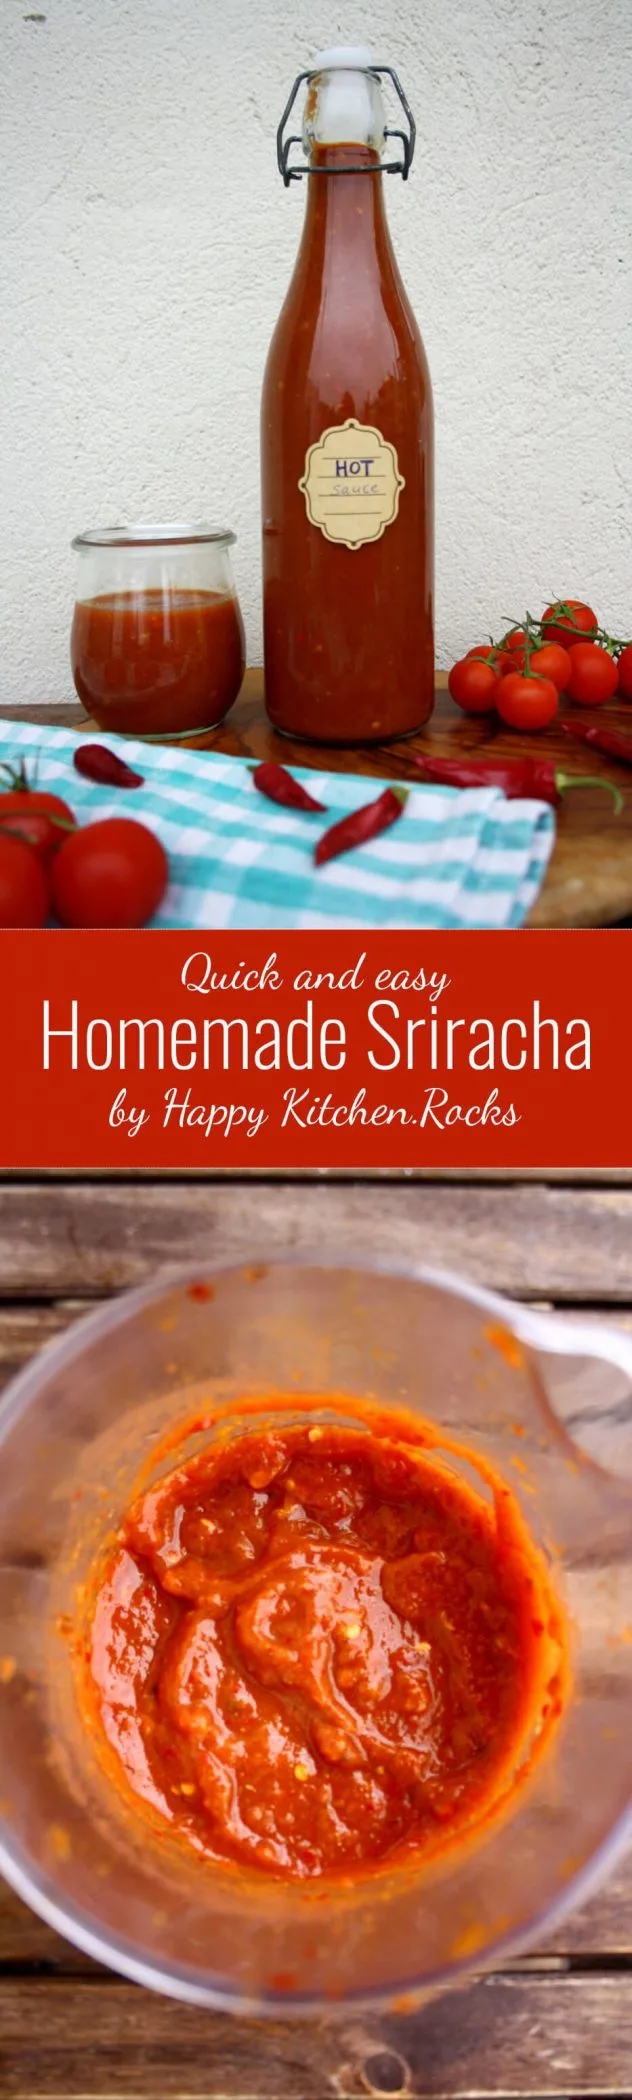 Quick and easy Homemade Sriracha sauce, perfect for any kind of grilled meat or seafood, burgers, eggs, noodles, fried rice and as a dipping sauce.